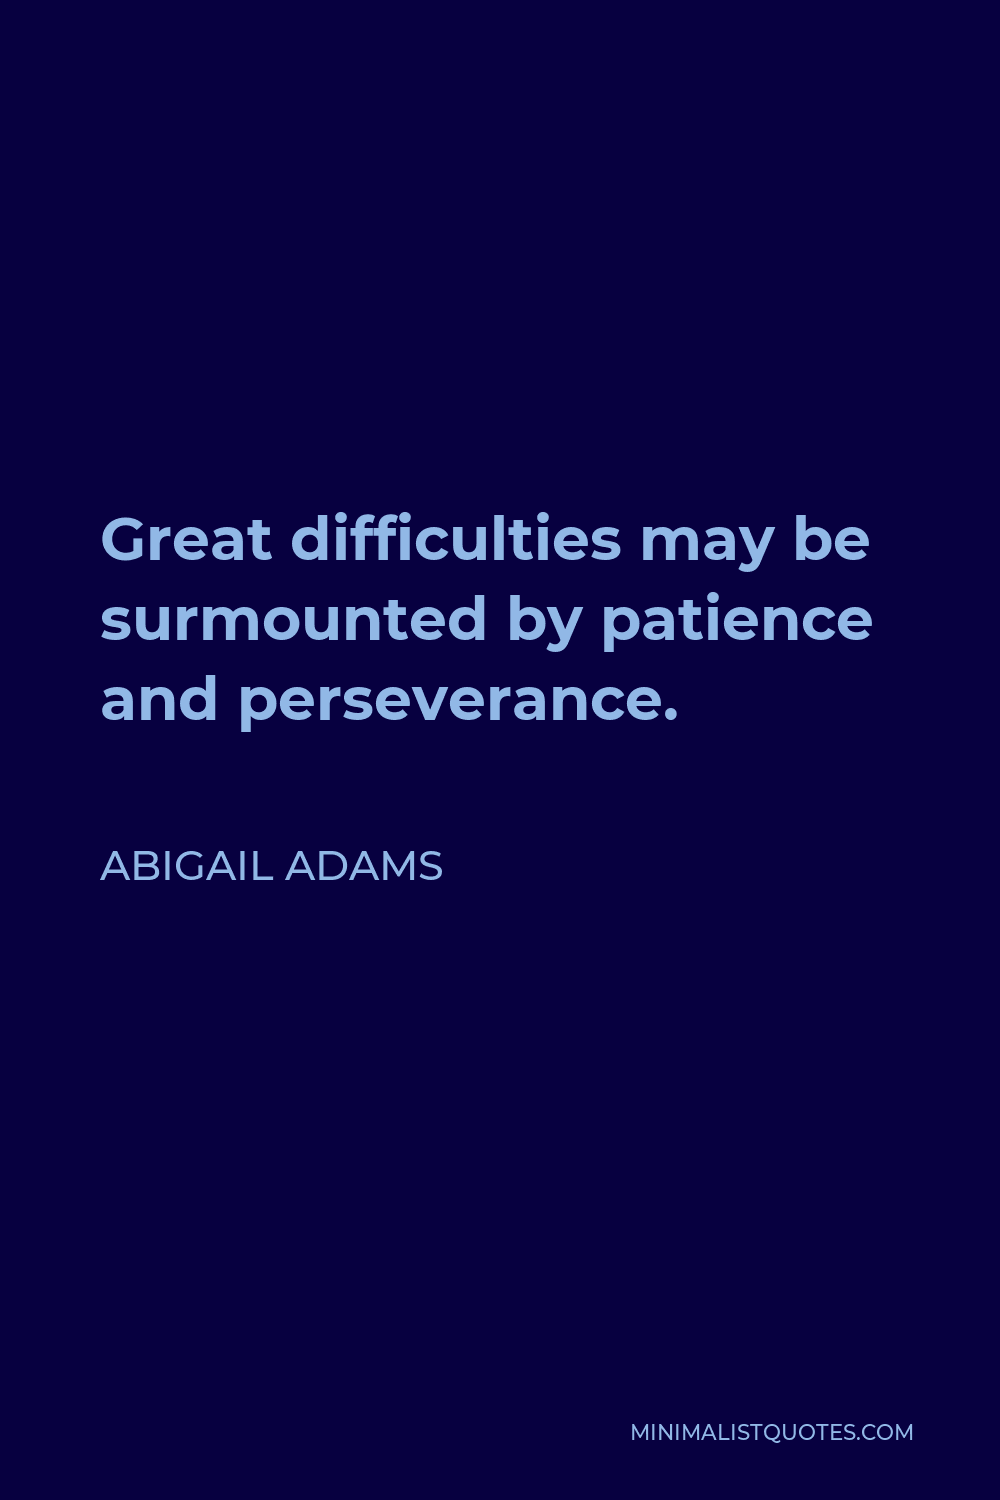 Abigail Adams Quote - Great difficulties may be surmounted by patience and perseverance.